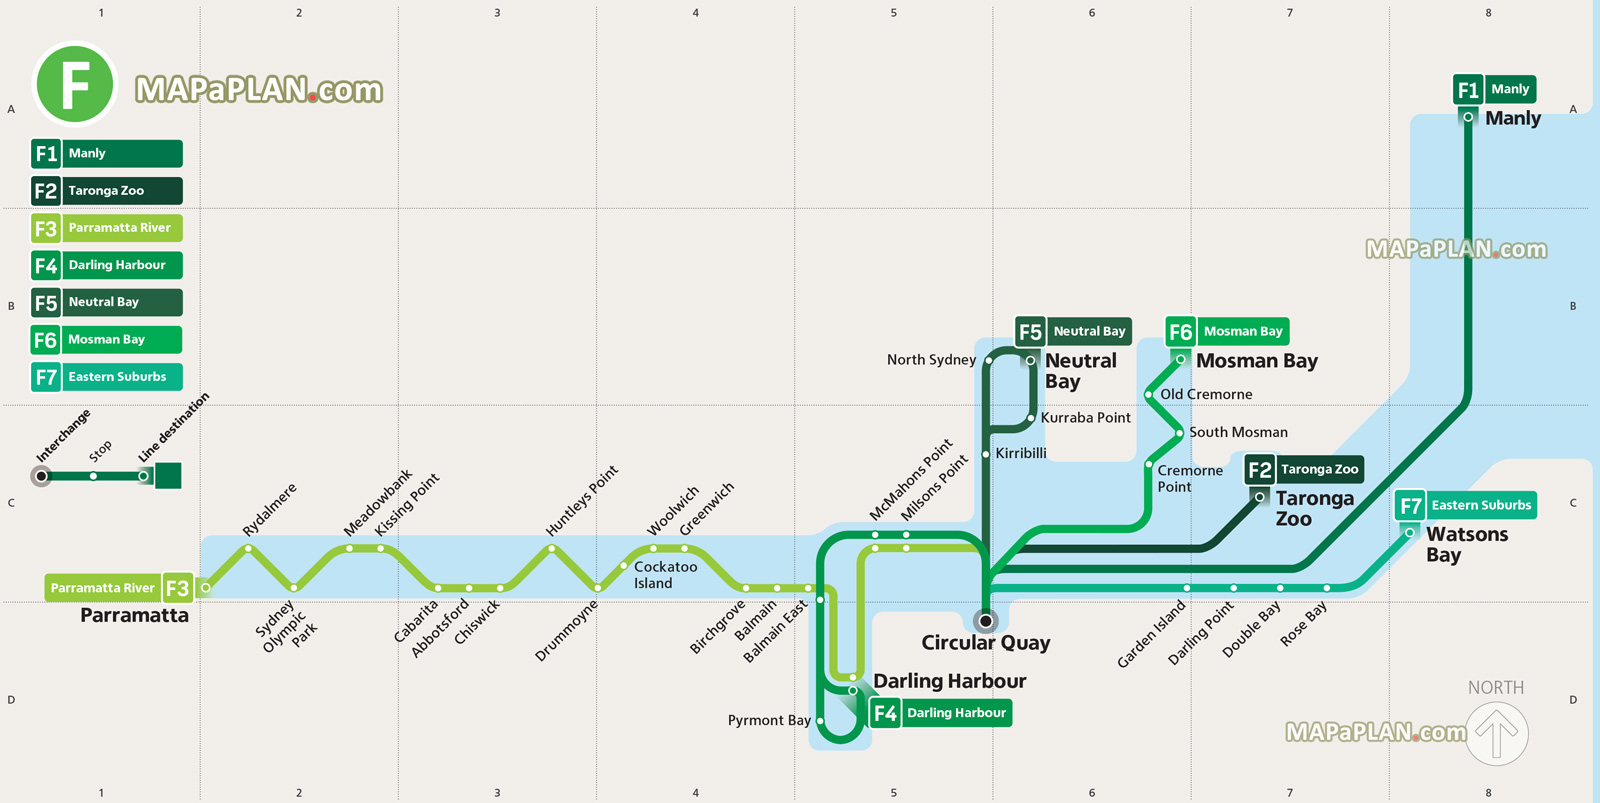 ferry routes interchanges stops circular quay darling harbour taronga zoo eastern suburbs Sydney top tourist attractions map